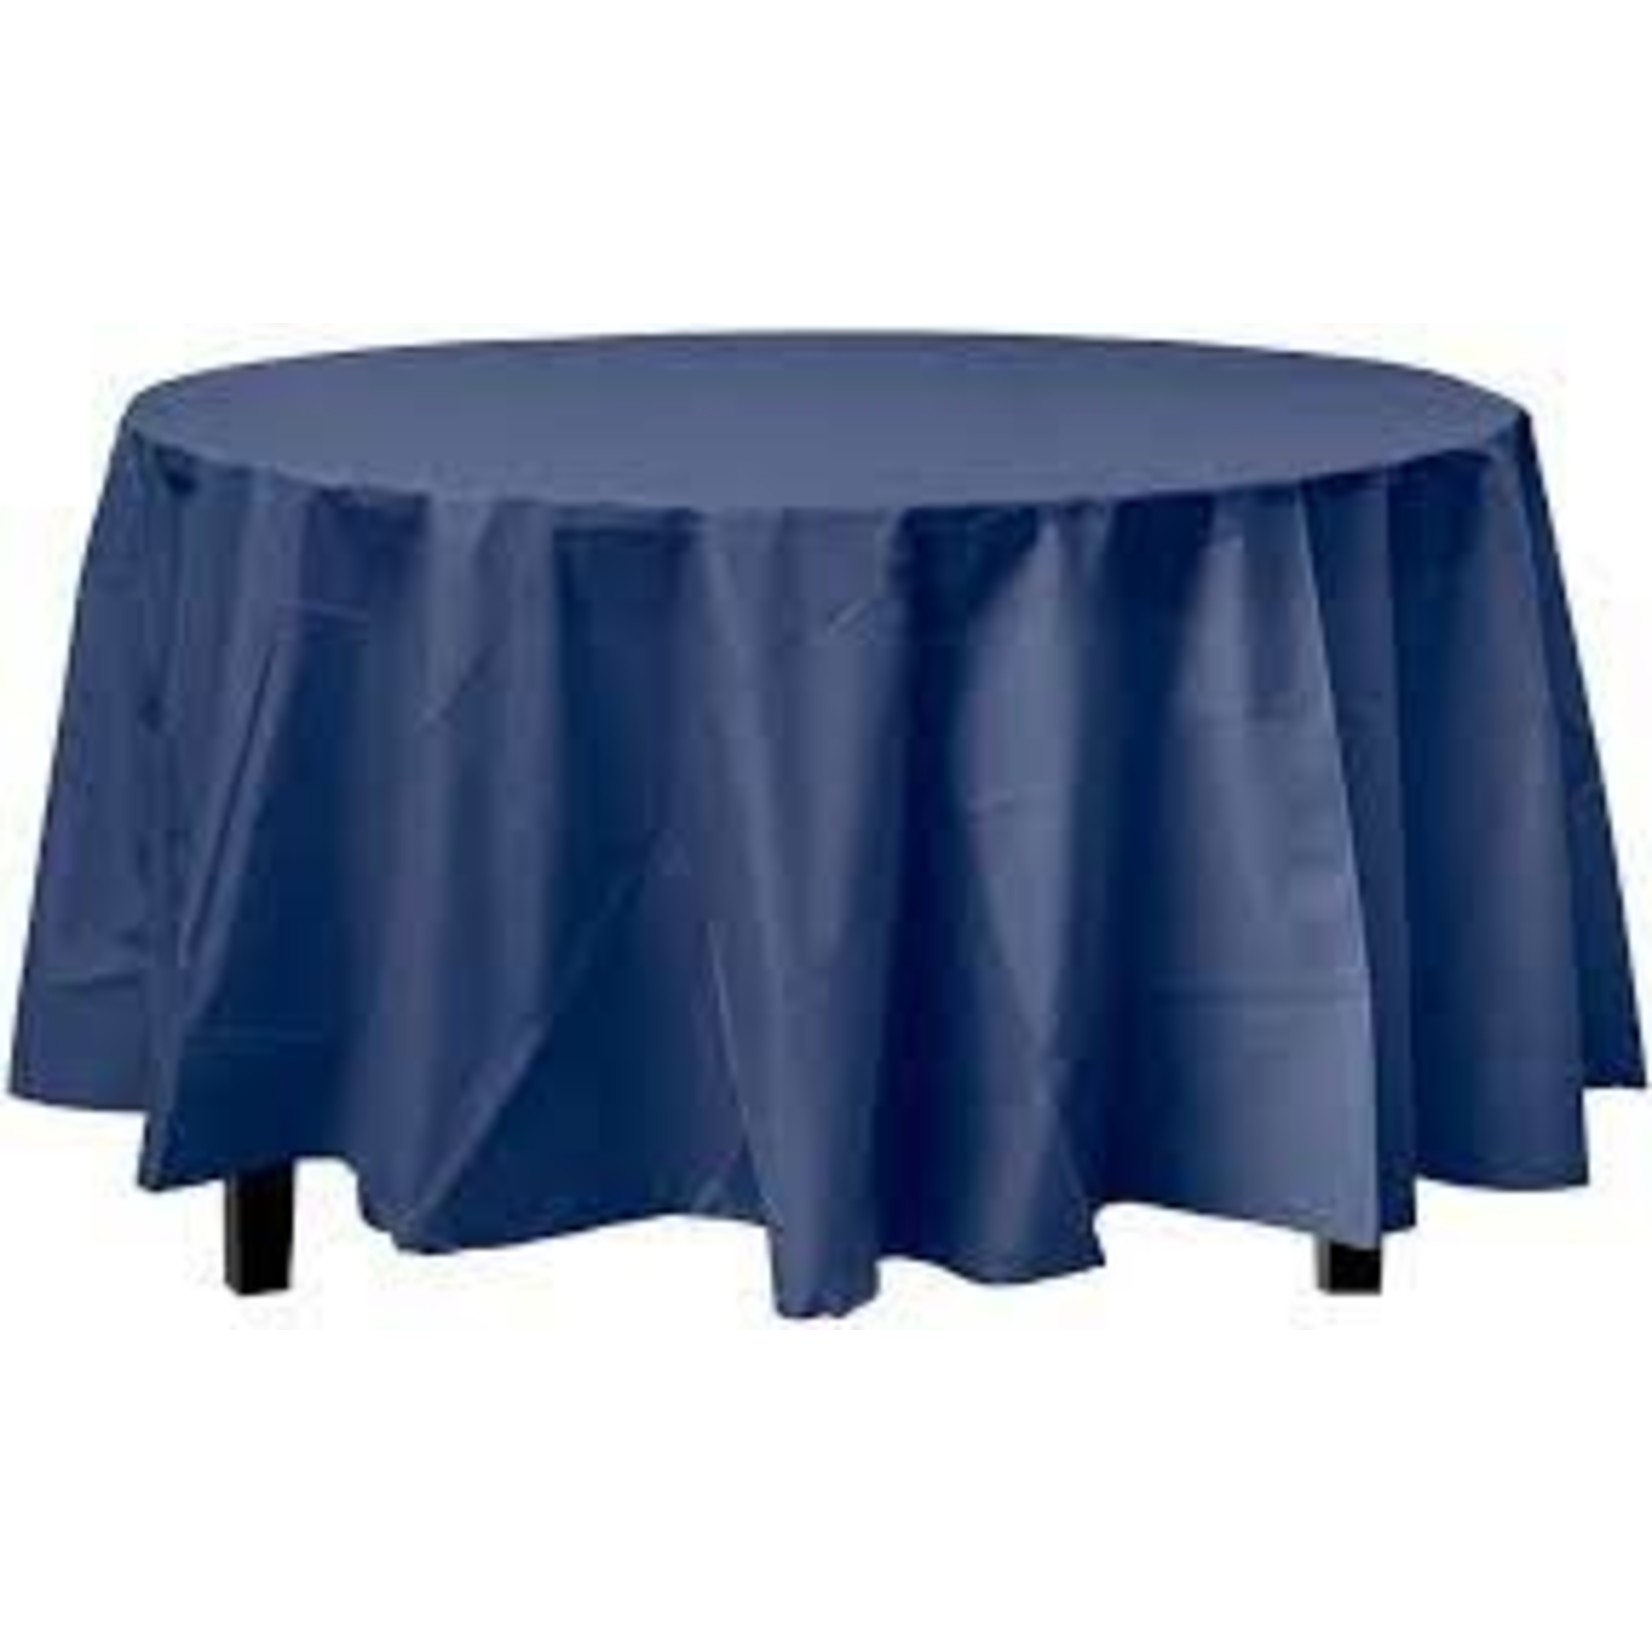 Round Table Cover Royal Blue